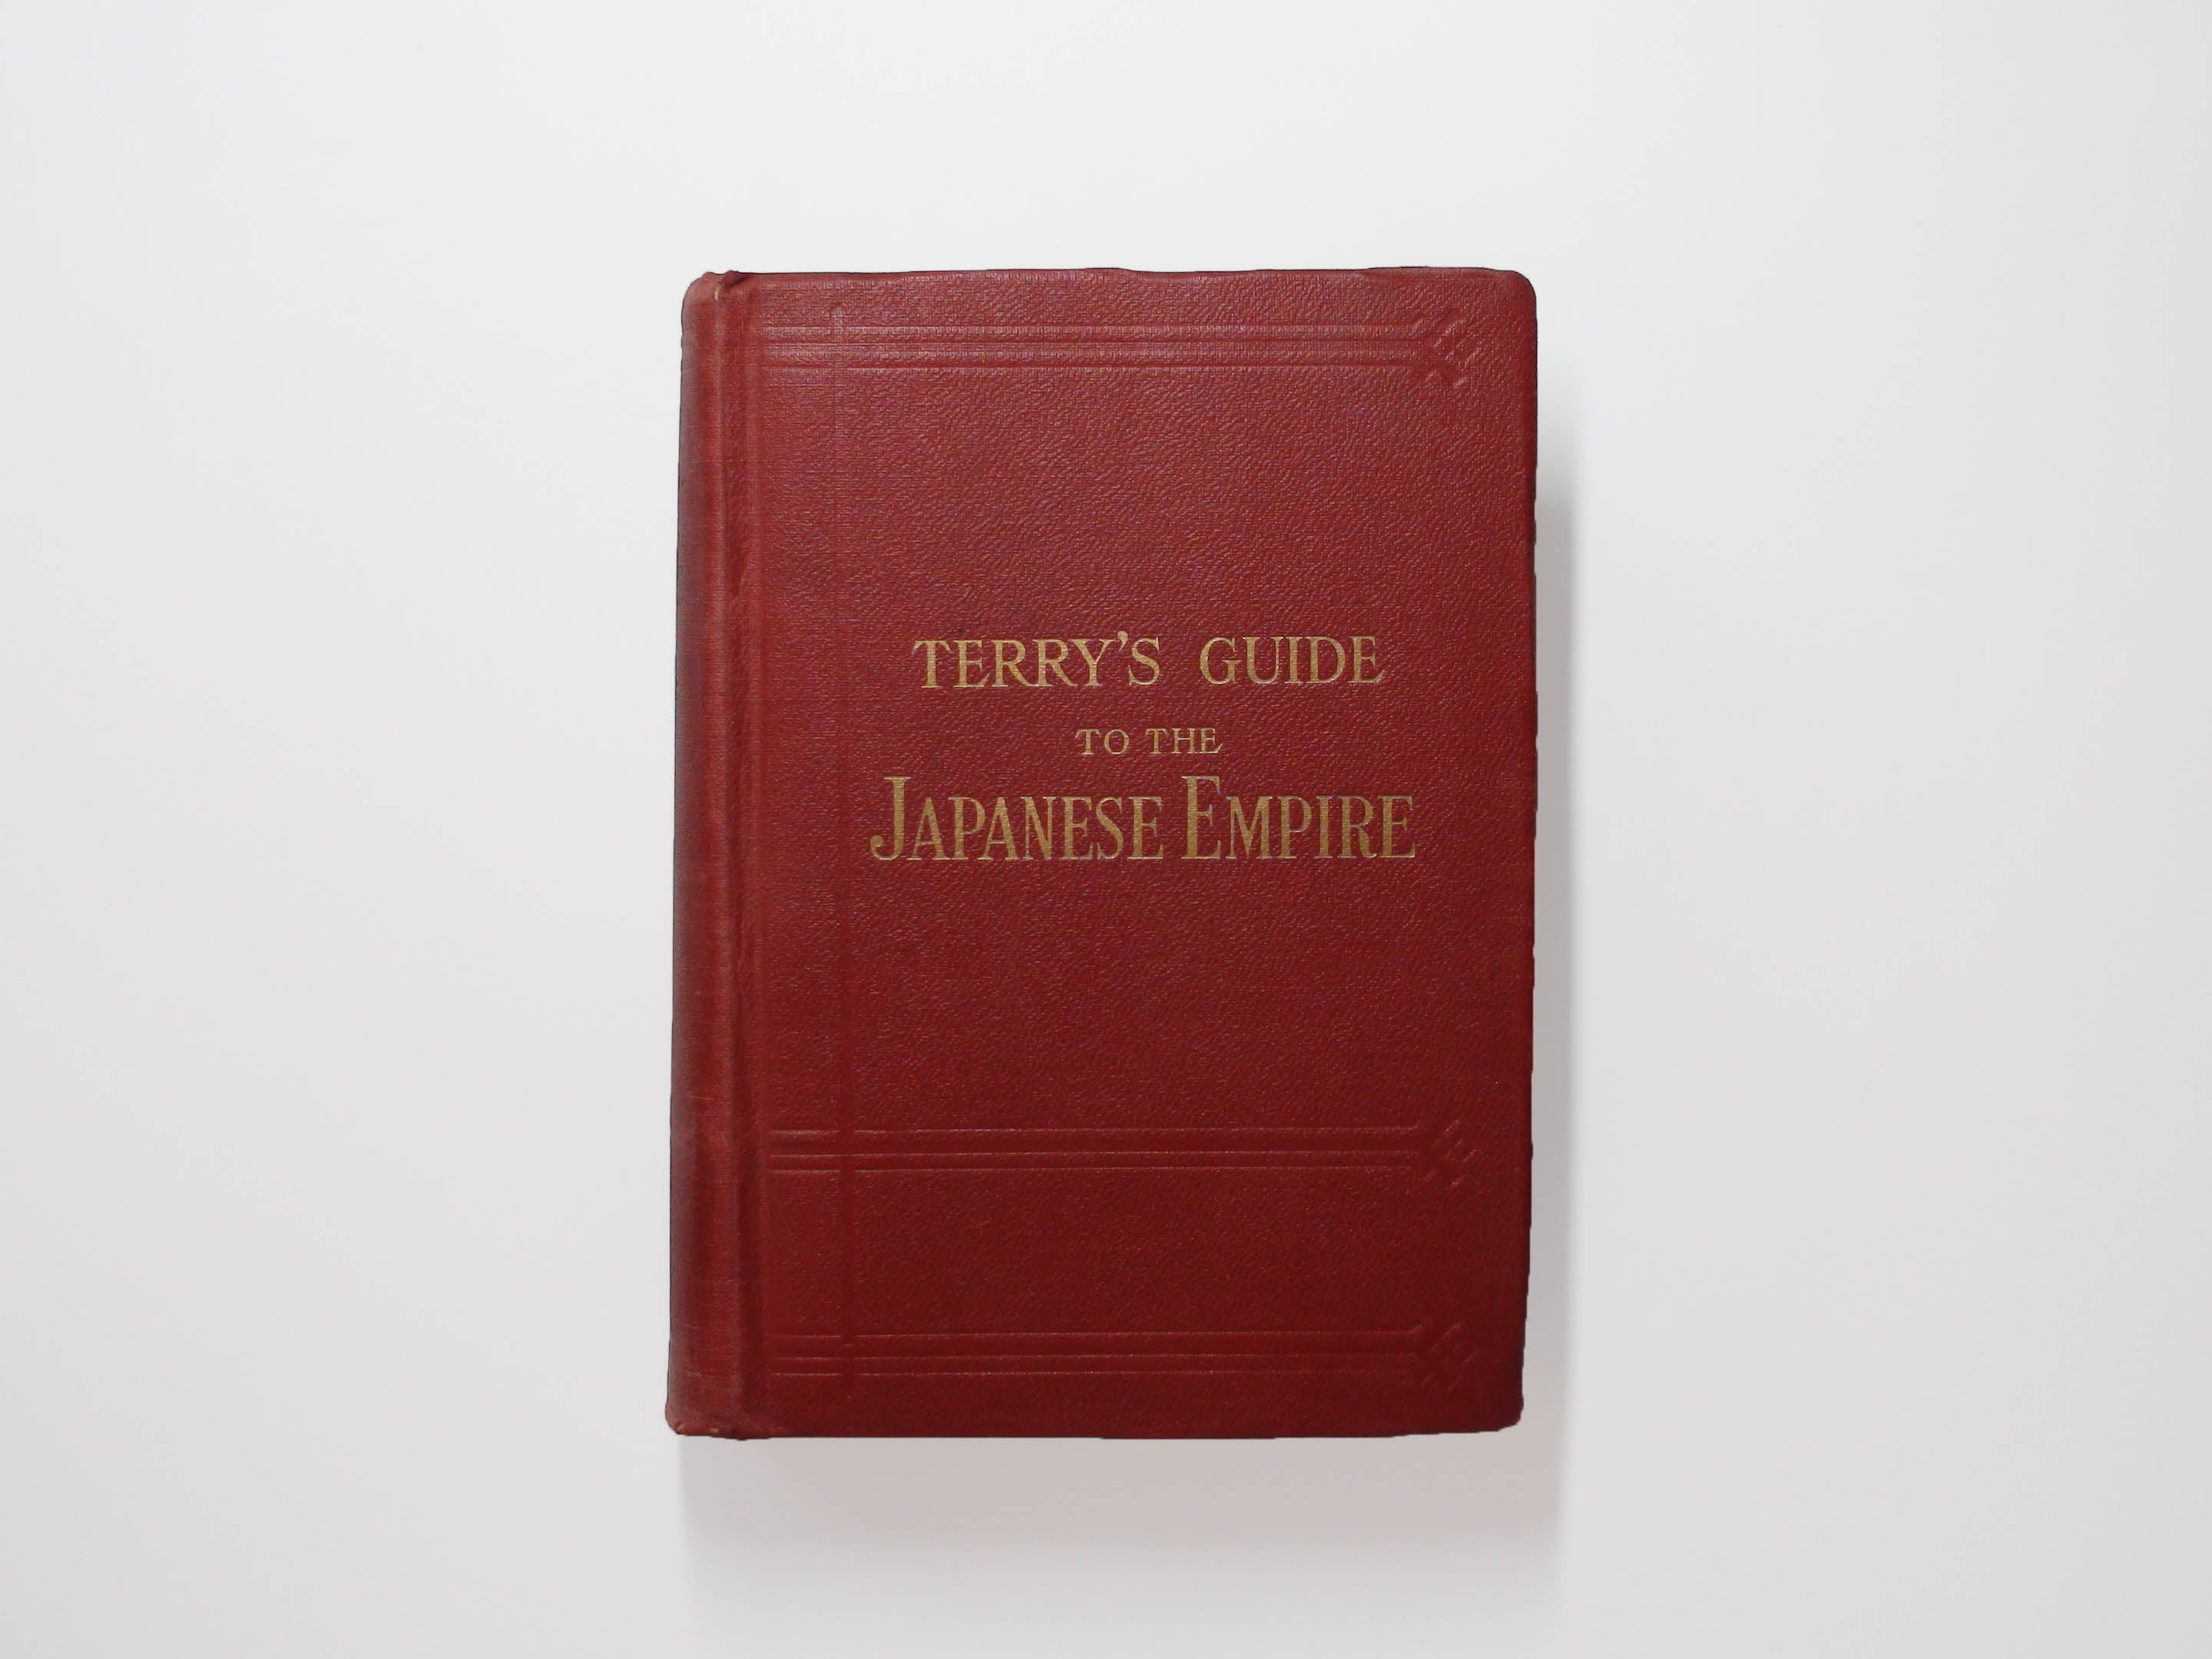 Terry's Guide To The Japanese Empire, Illustrated with Maps, 1920